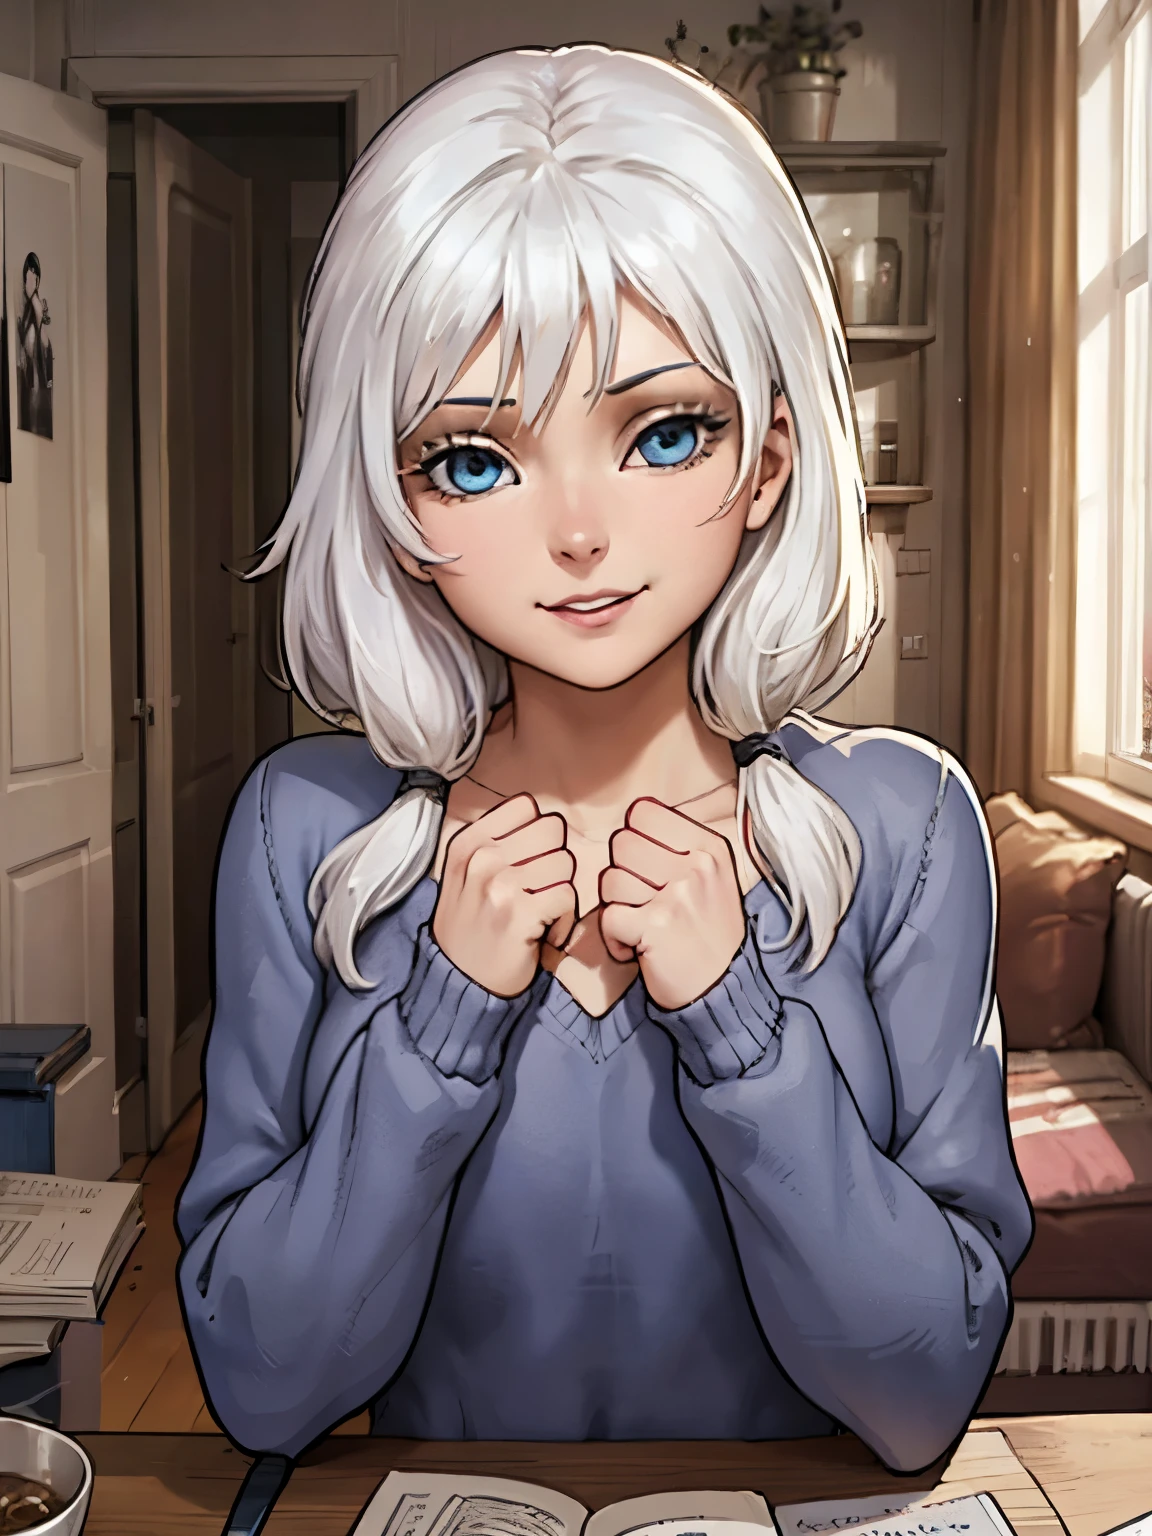 ((ultra quality)), ((Masterpiece)), olya, short stature, (Black & White Style), ((White hair)), (Beautiful face), (beautiful female lips), (), charming, ((Innocent expression)), looking at the camera smiling softly, eyes closed a little, (Skin color white), (White skin), glare on the body, ((detailed beautiful female eyes)), ((Light blue eyes)), (juicy female lips), (dark eyeliner), (beautiful female hands), ((Ideal female figure)), Ideal female body, beautiful waist, beautiful hips, small breasts, ((subtle and beautiful)), sitting seductively on the sofa, (wearing a gray long sweatshirt) background: In a living room, ((depth of field)), ((high quality clear image)), (clear details), ((High detail)), realistically, professional photo session, ((Clear Focus))